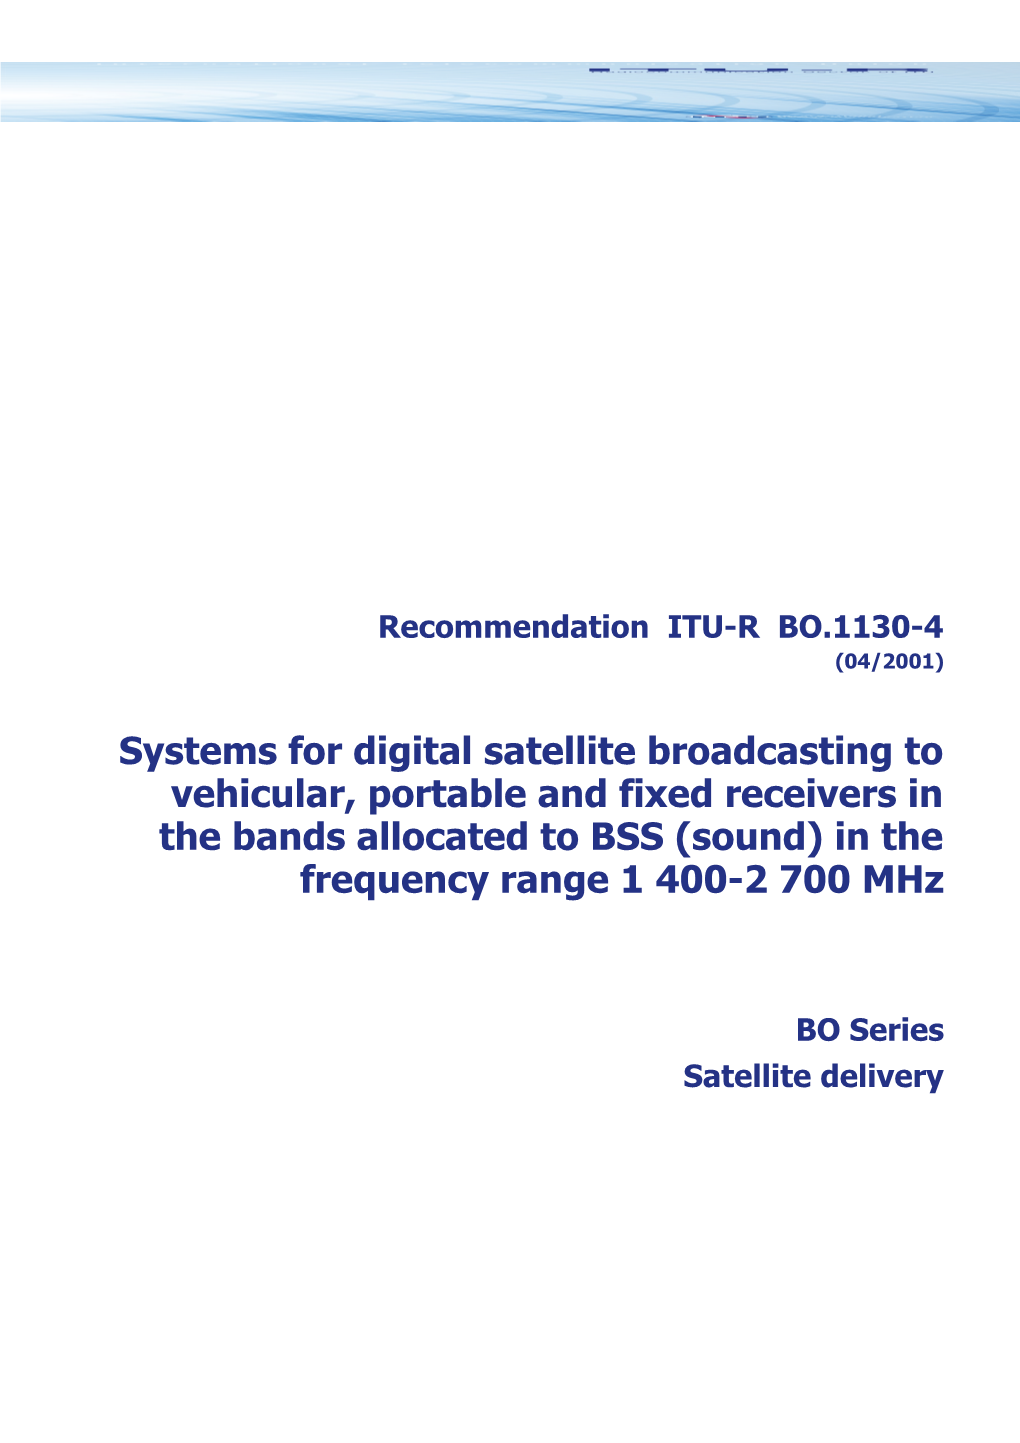 Systems for Digital Satellite Broadcasting to Vehicular, Portable and Fixed Receivers